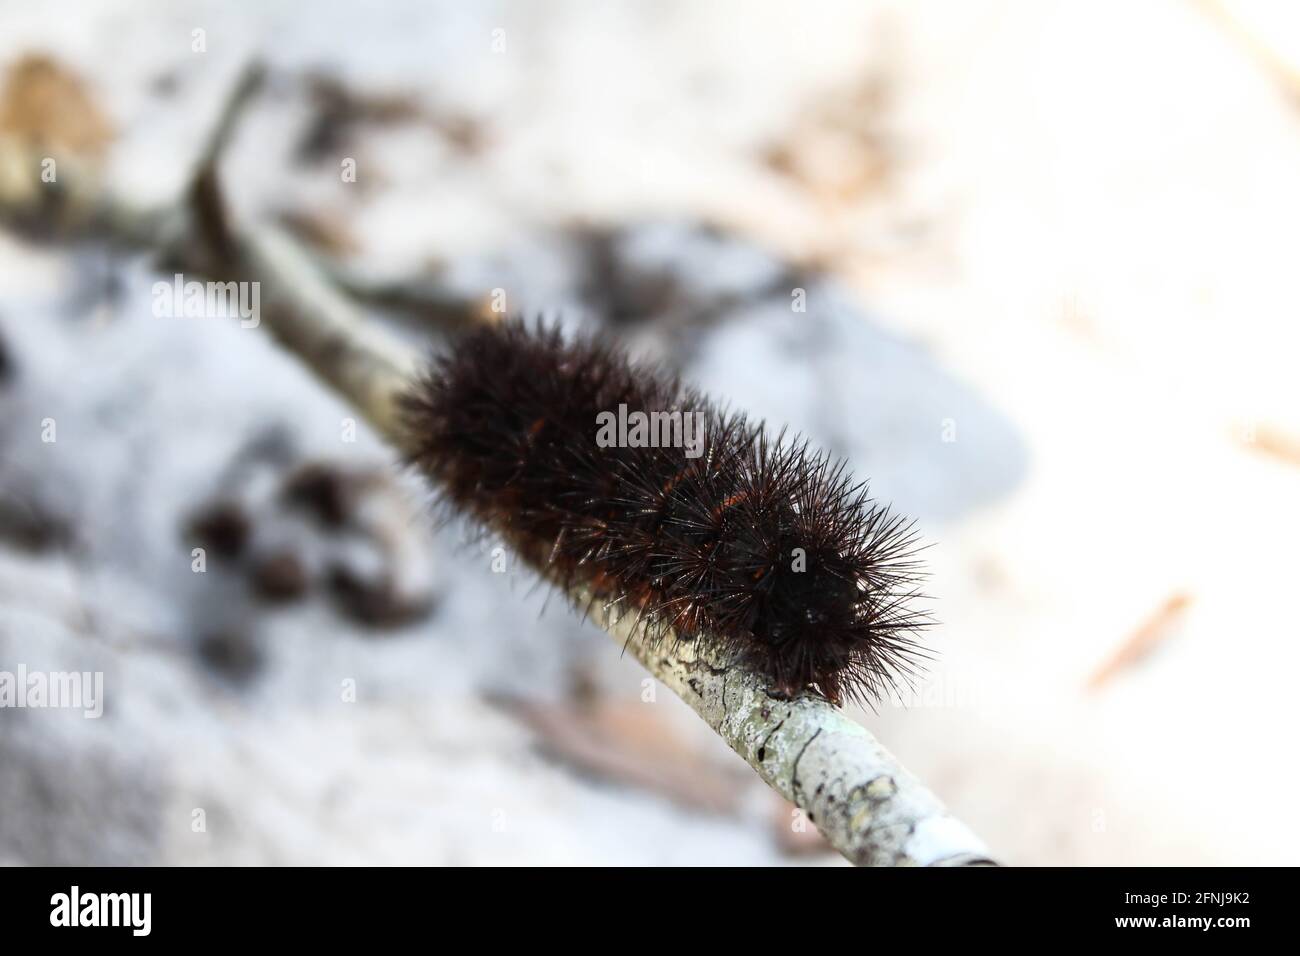 Giant Leopard moth caterpillar climbing on a stick. Black fuzzy caterpillar with spikes and red bands. Hypercompe scribonia Stock Photo